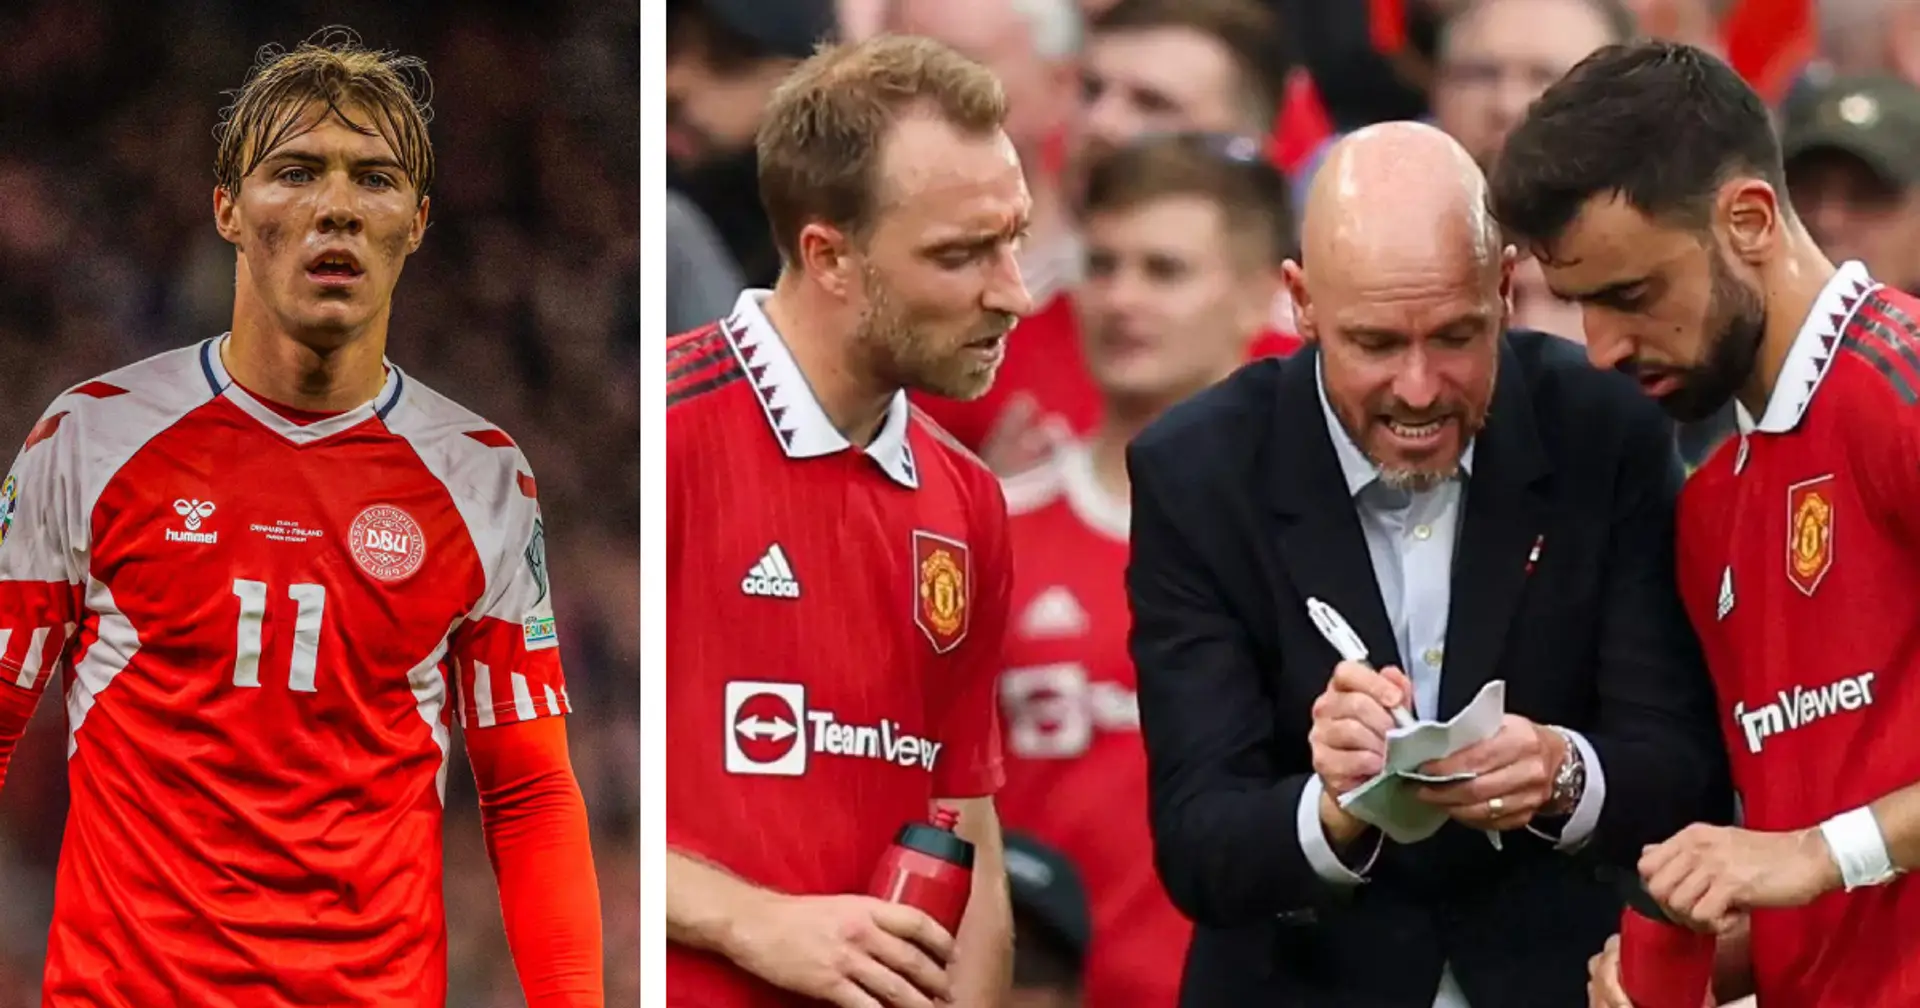 'I can see him at Man United': Eriksen reveals whether he spoke to Ten Hag over Rasmus Hojlund